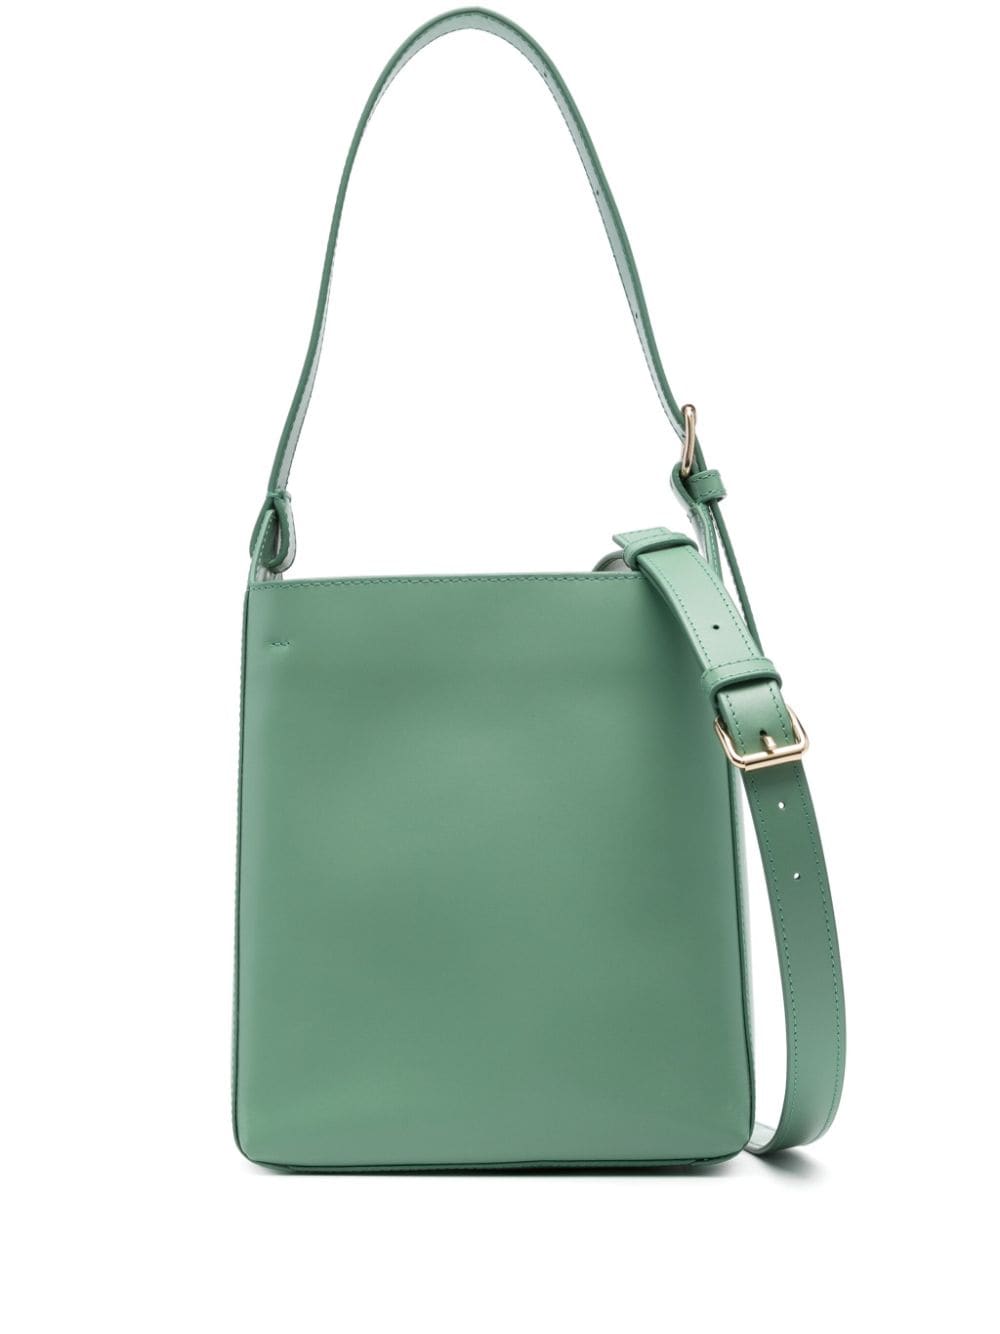 Apc Smooth Leather Shoulder Bag In Green